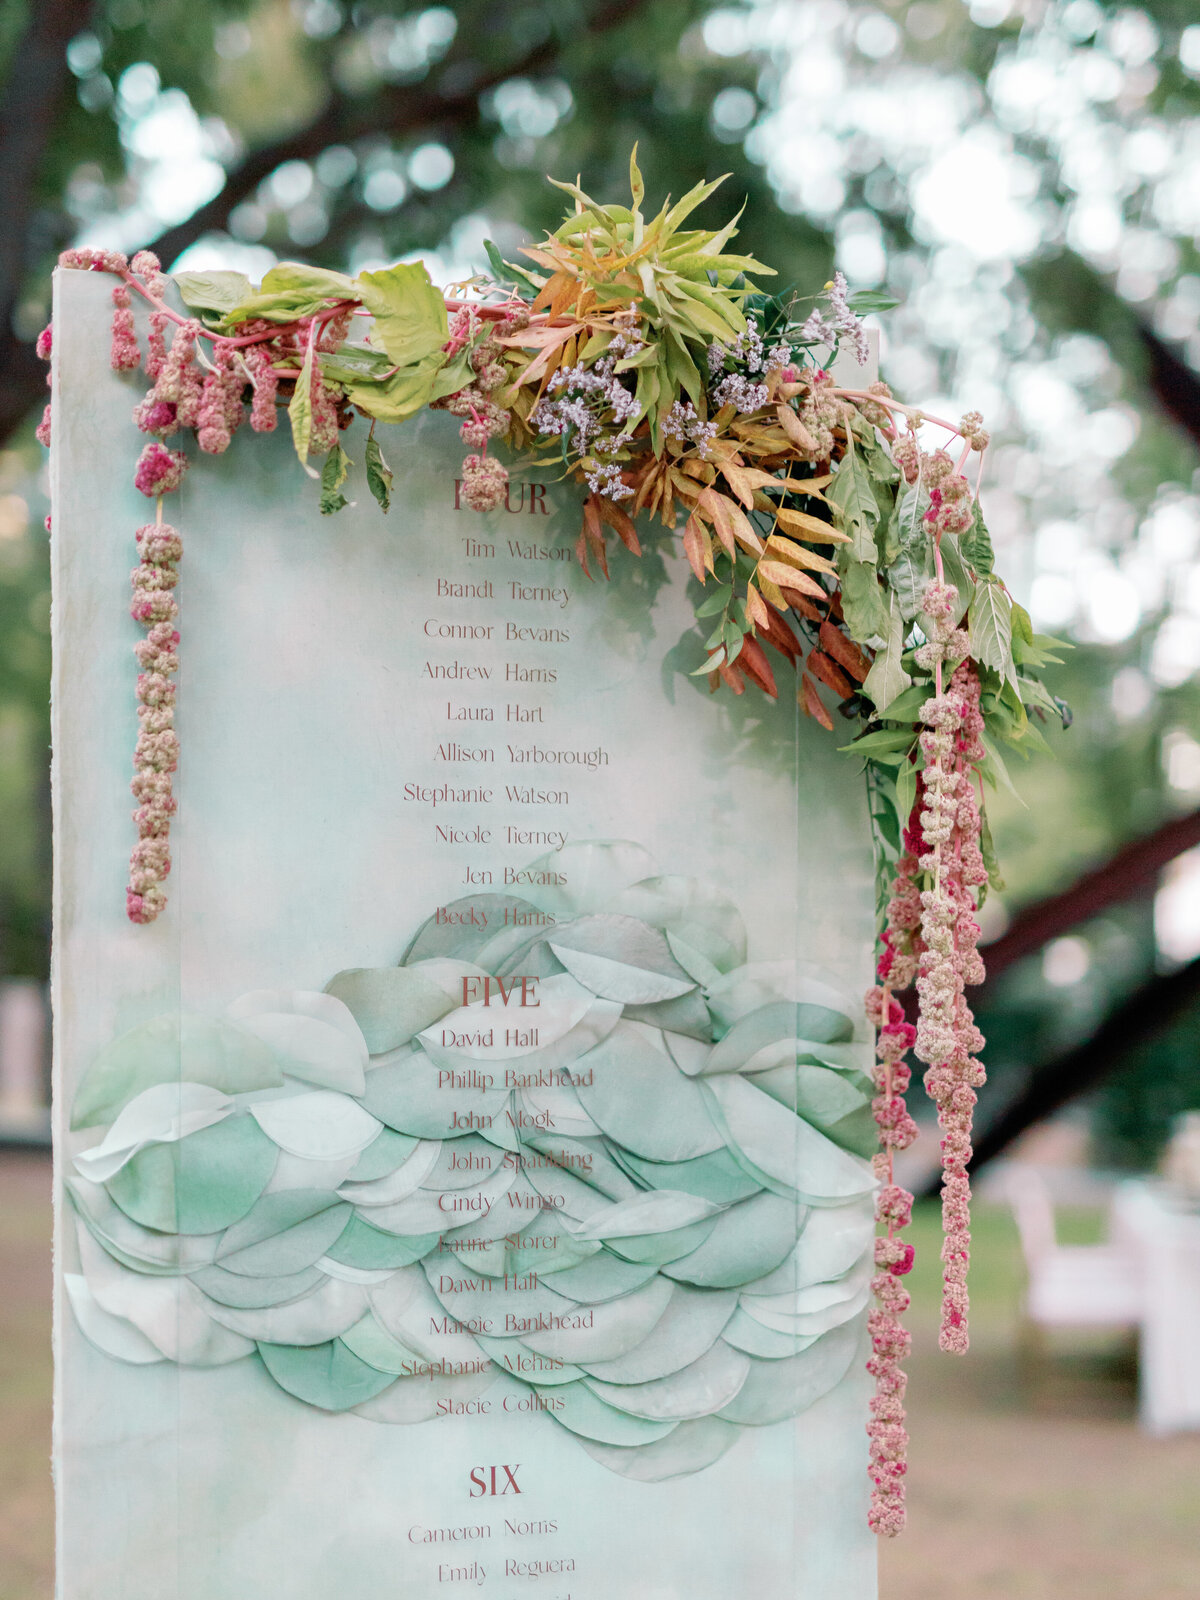 Nasher-Sculpture-Center-Dallas-Texas-DFW-TX-Weddings-Events-Outdoor-Garden-Party-Whimsical-Modern-Art-Museum-Romantic-Fall-Transition-Colors-Spring-Pink-Green-Linear-Ruffles-Turn-The-Paige-Events-Kelsey-LaNae-Photography-0120